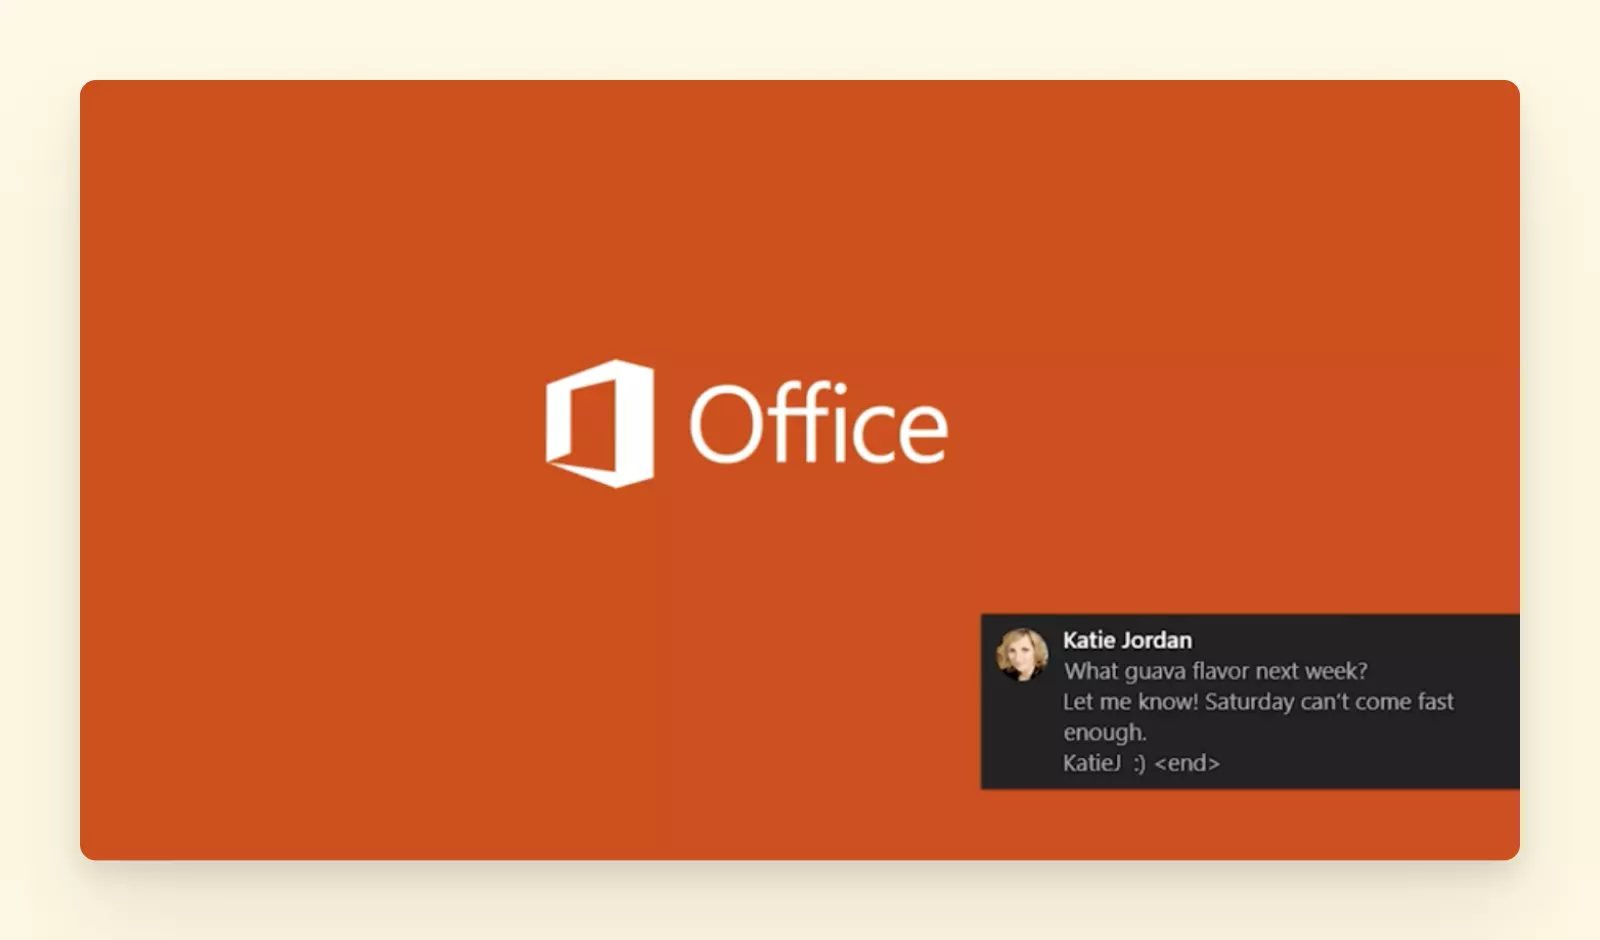 Outlook and Office Suite integration